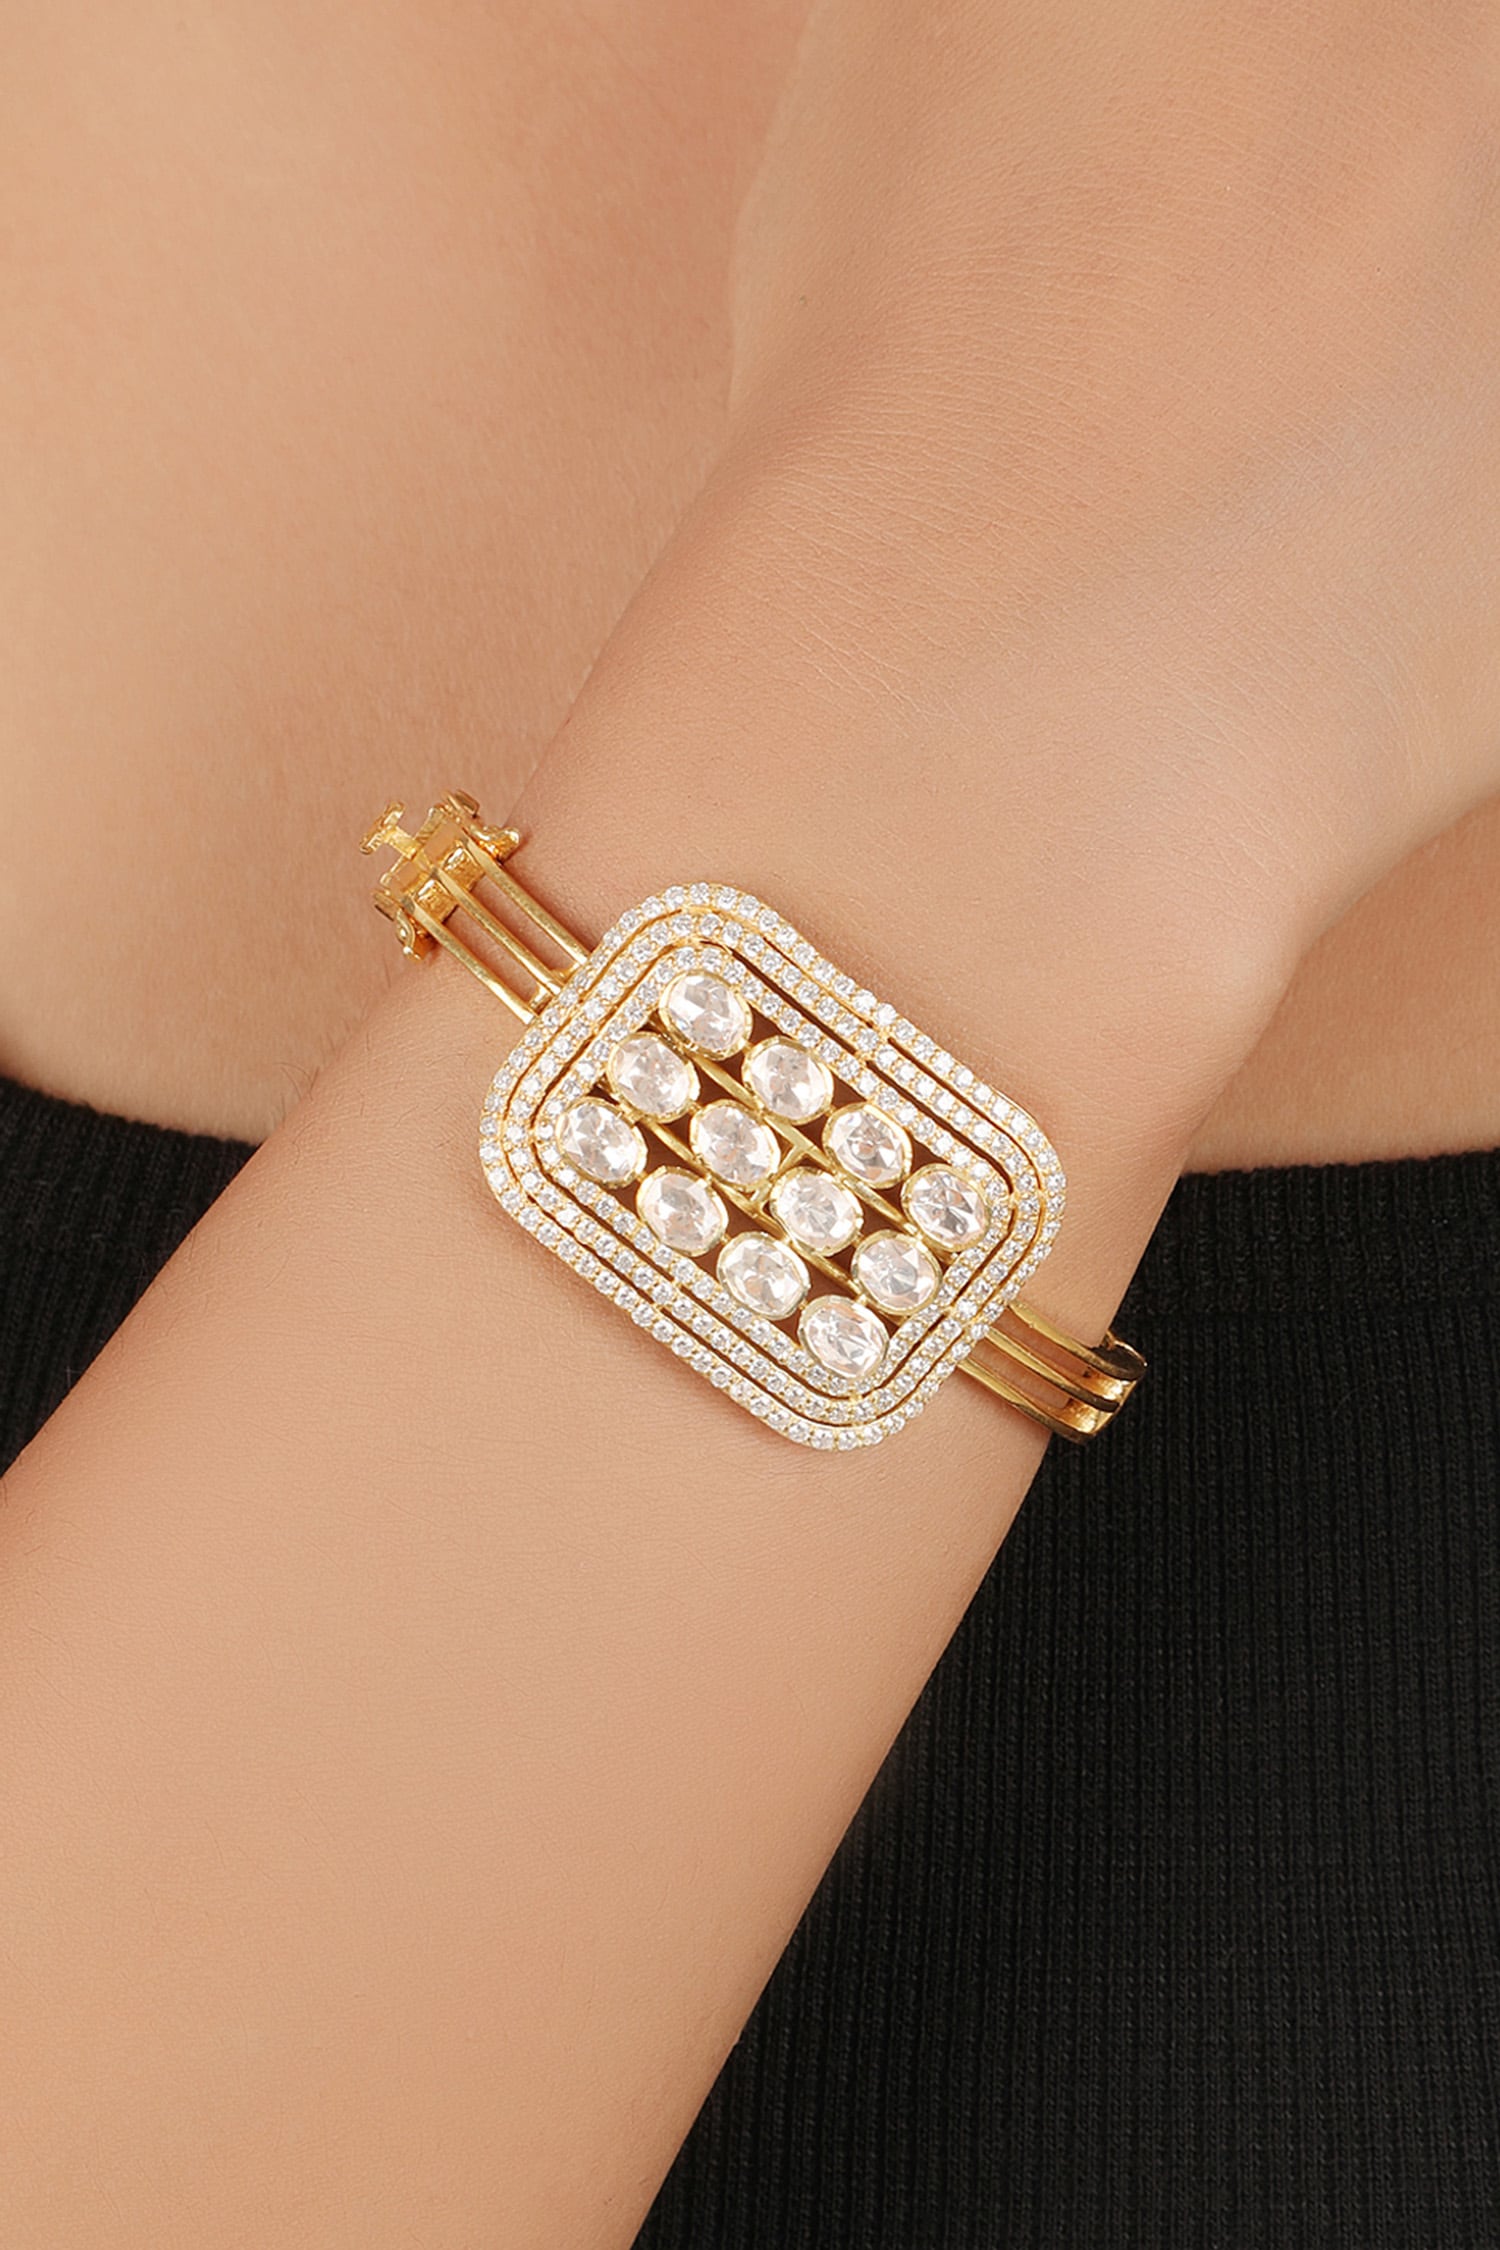 Trend Watching: Diamond watches to spark joy in your life